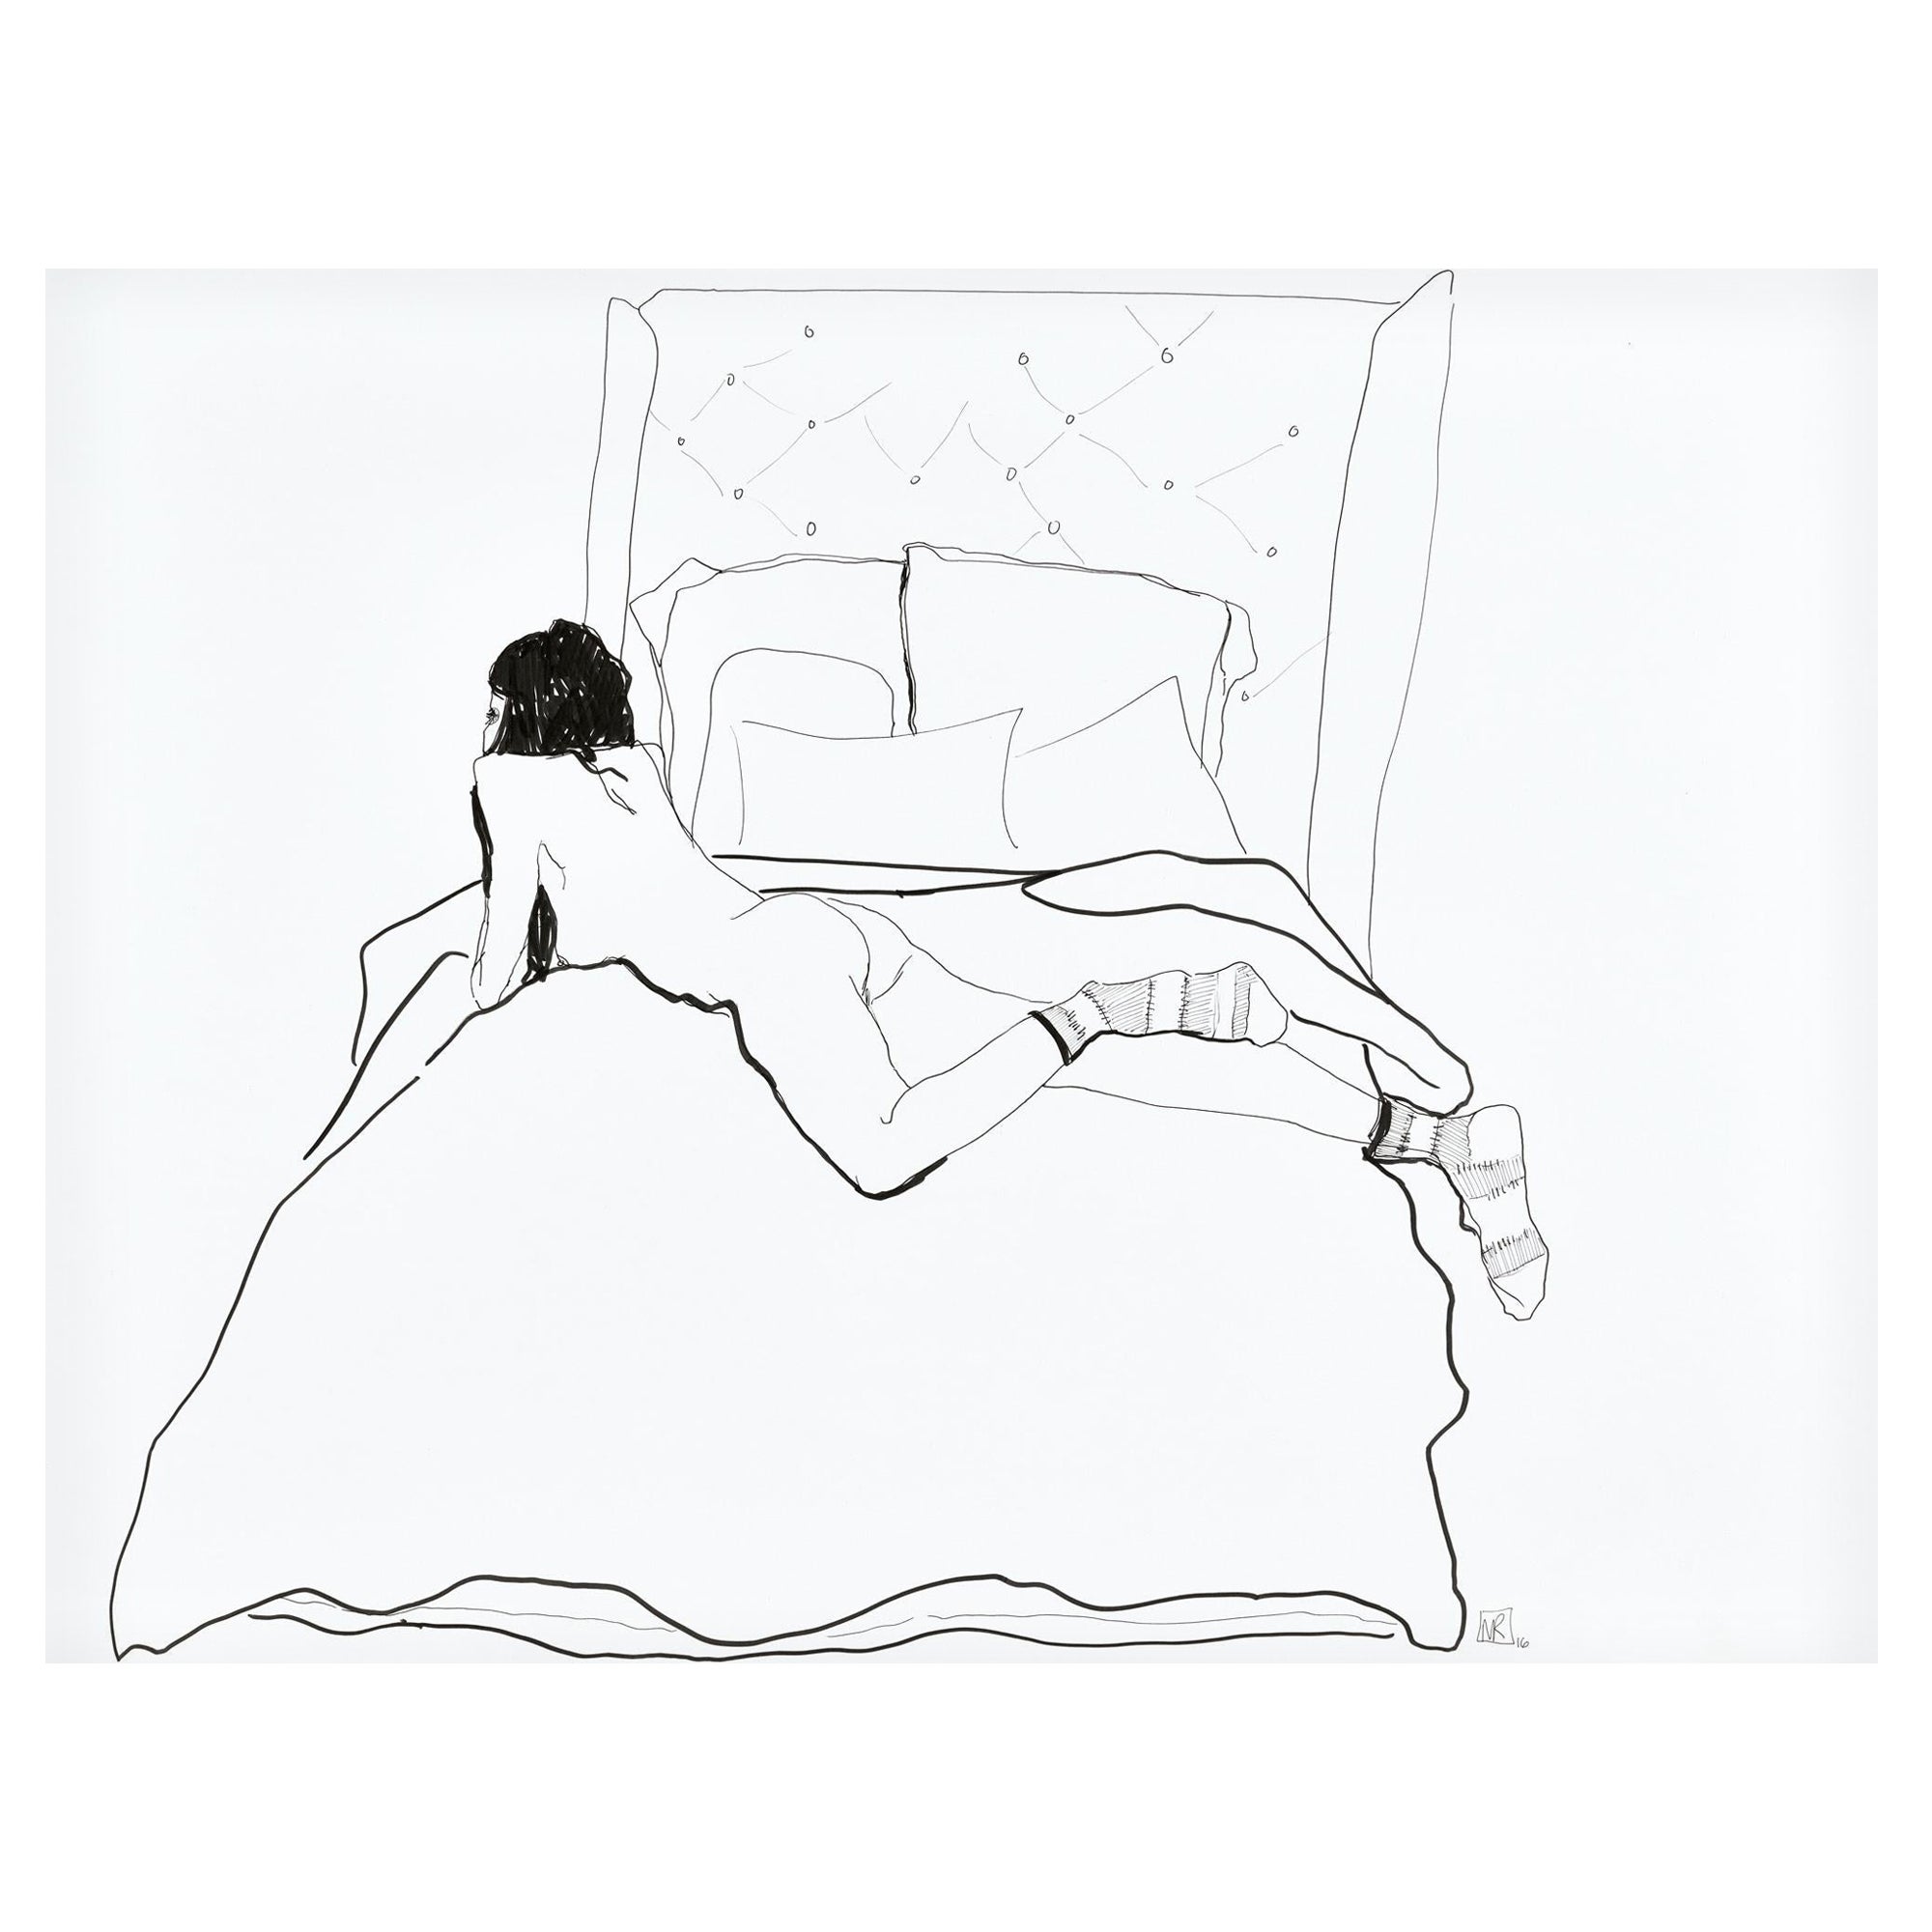 Mel Reese Nude - "Sarah no. 2", figure line drawing of nude female lounging with socks on